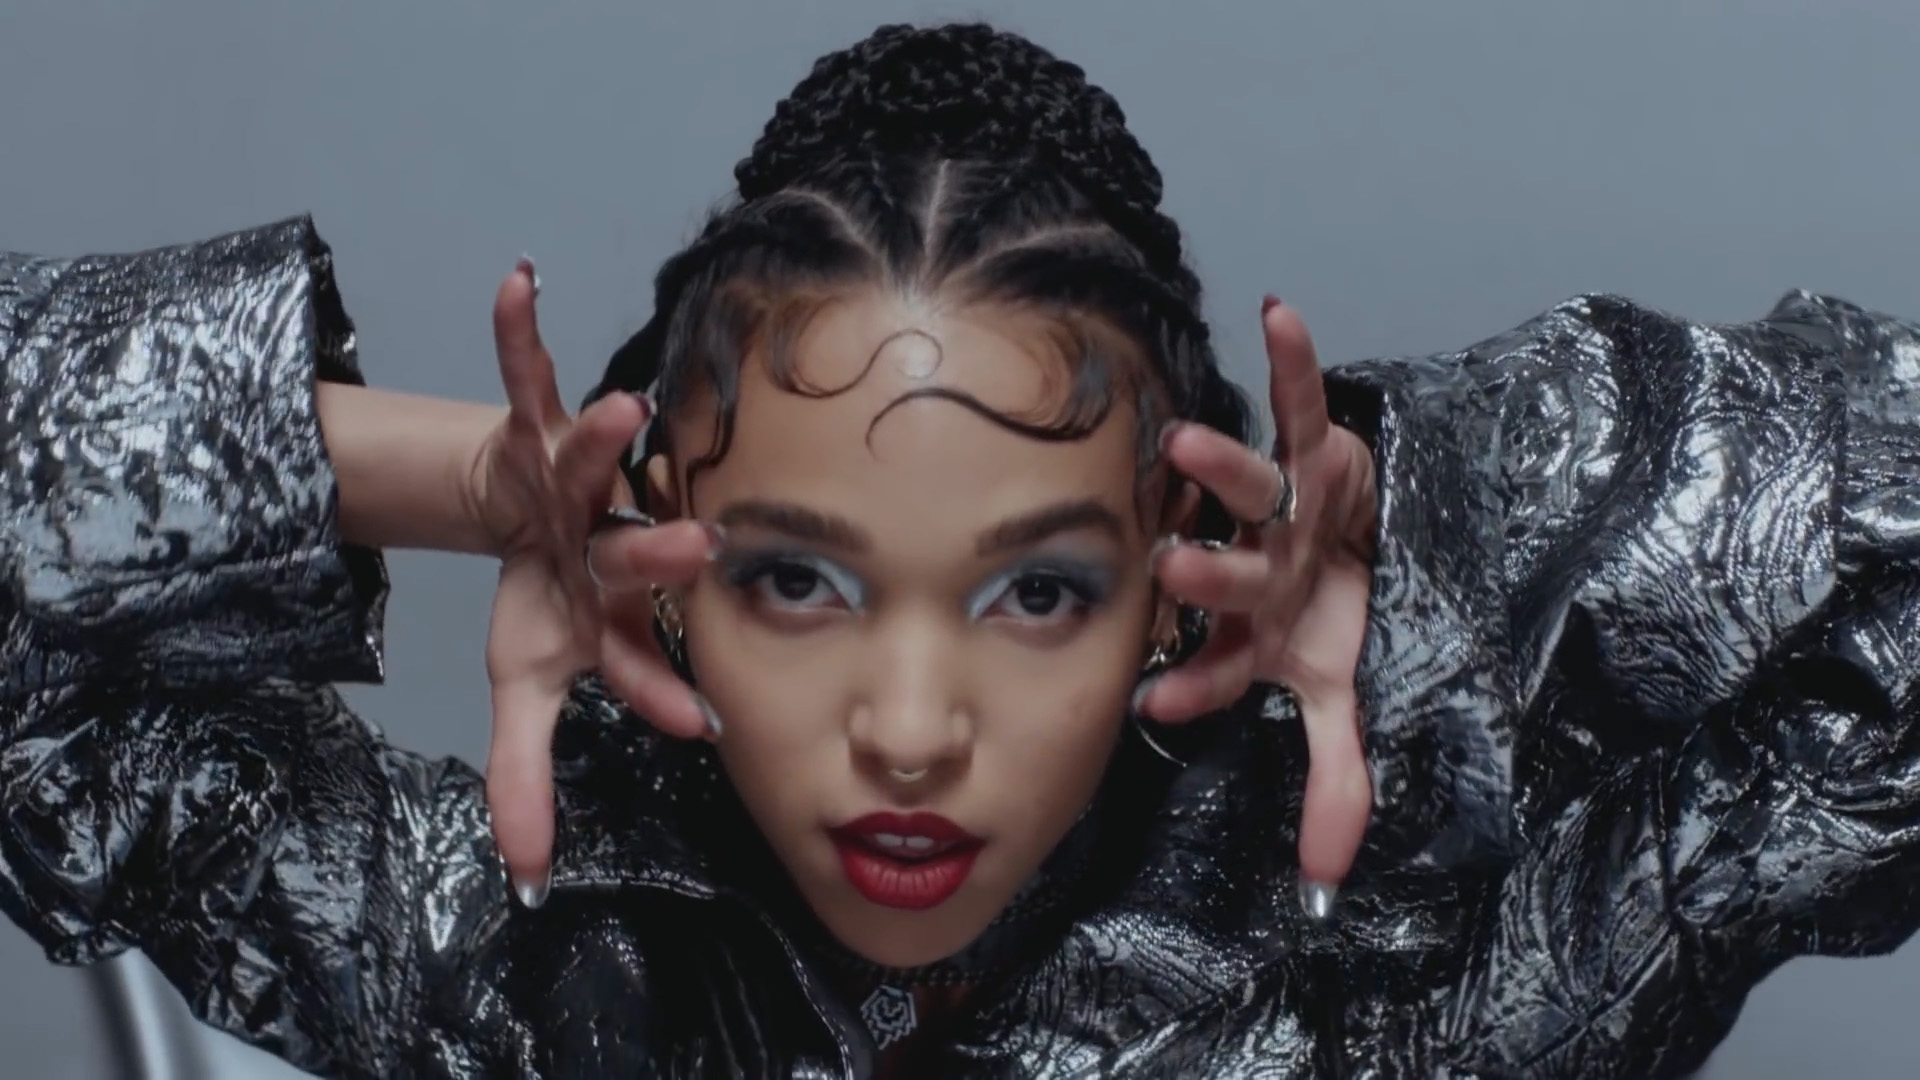 FKA Twigs discusses Creativity, Femininity, and Directing in New Interview